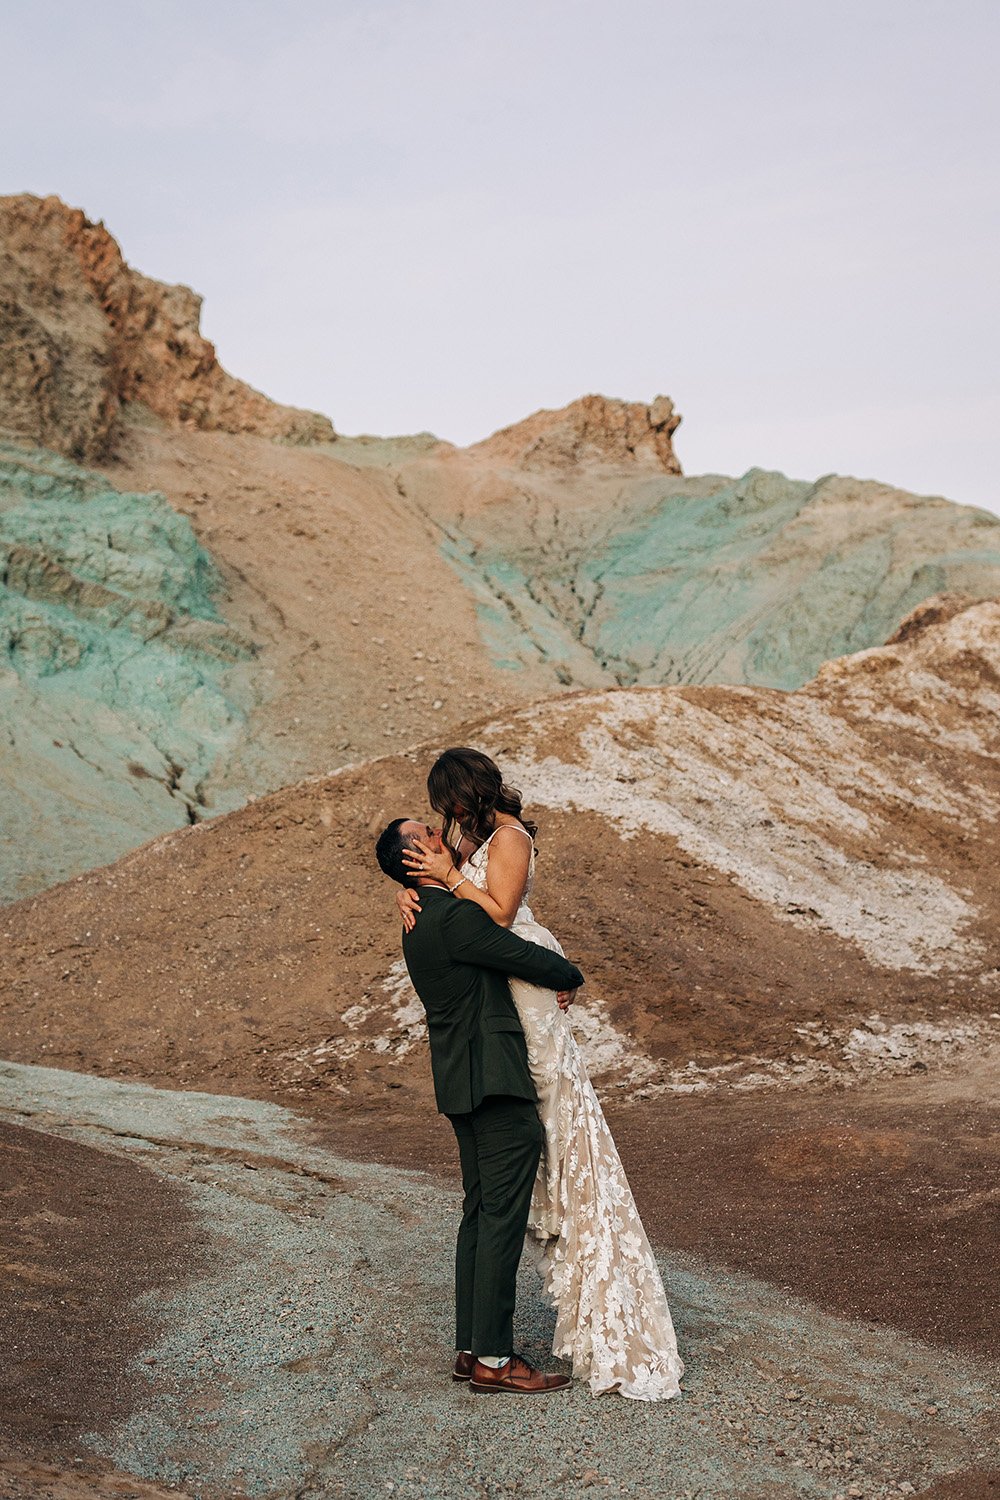 A man picks up his wife in a wedding dress in the colorful hills of Death Valley. 